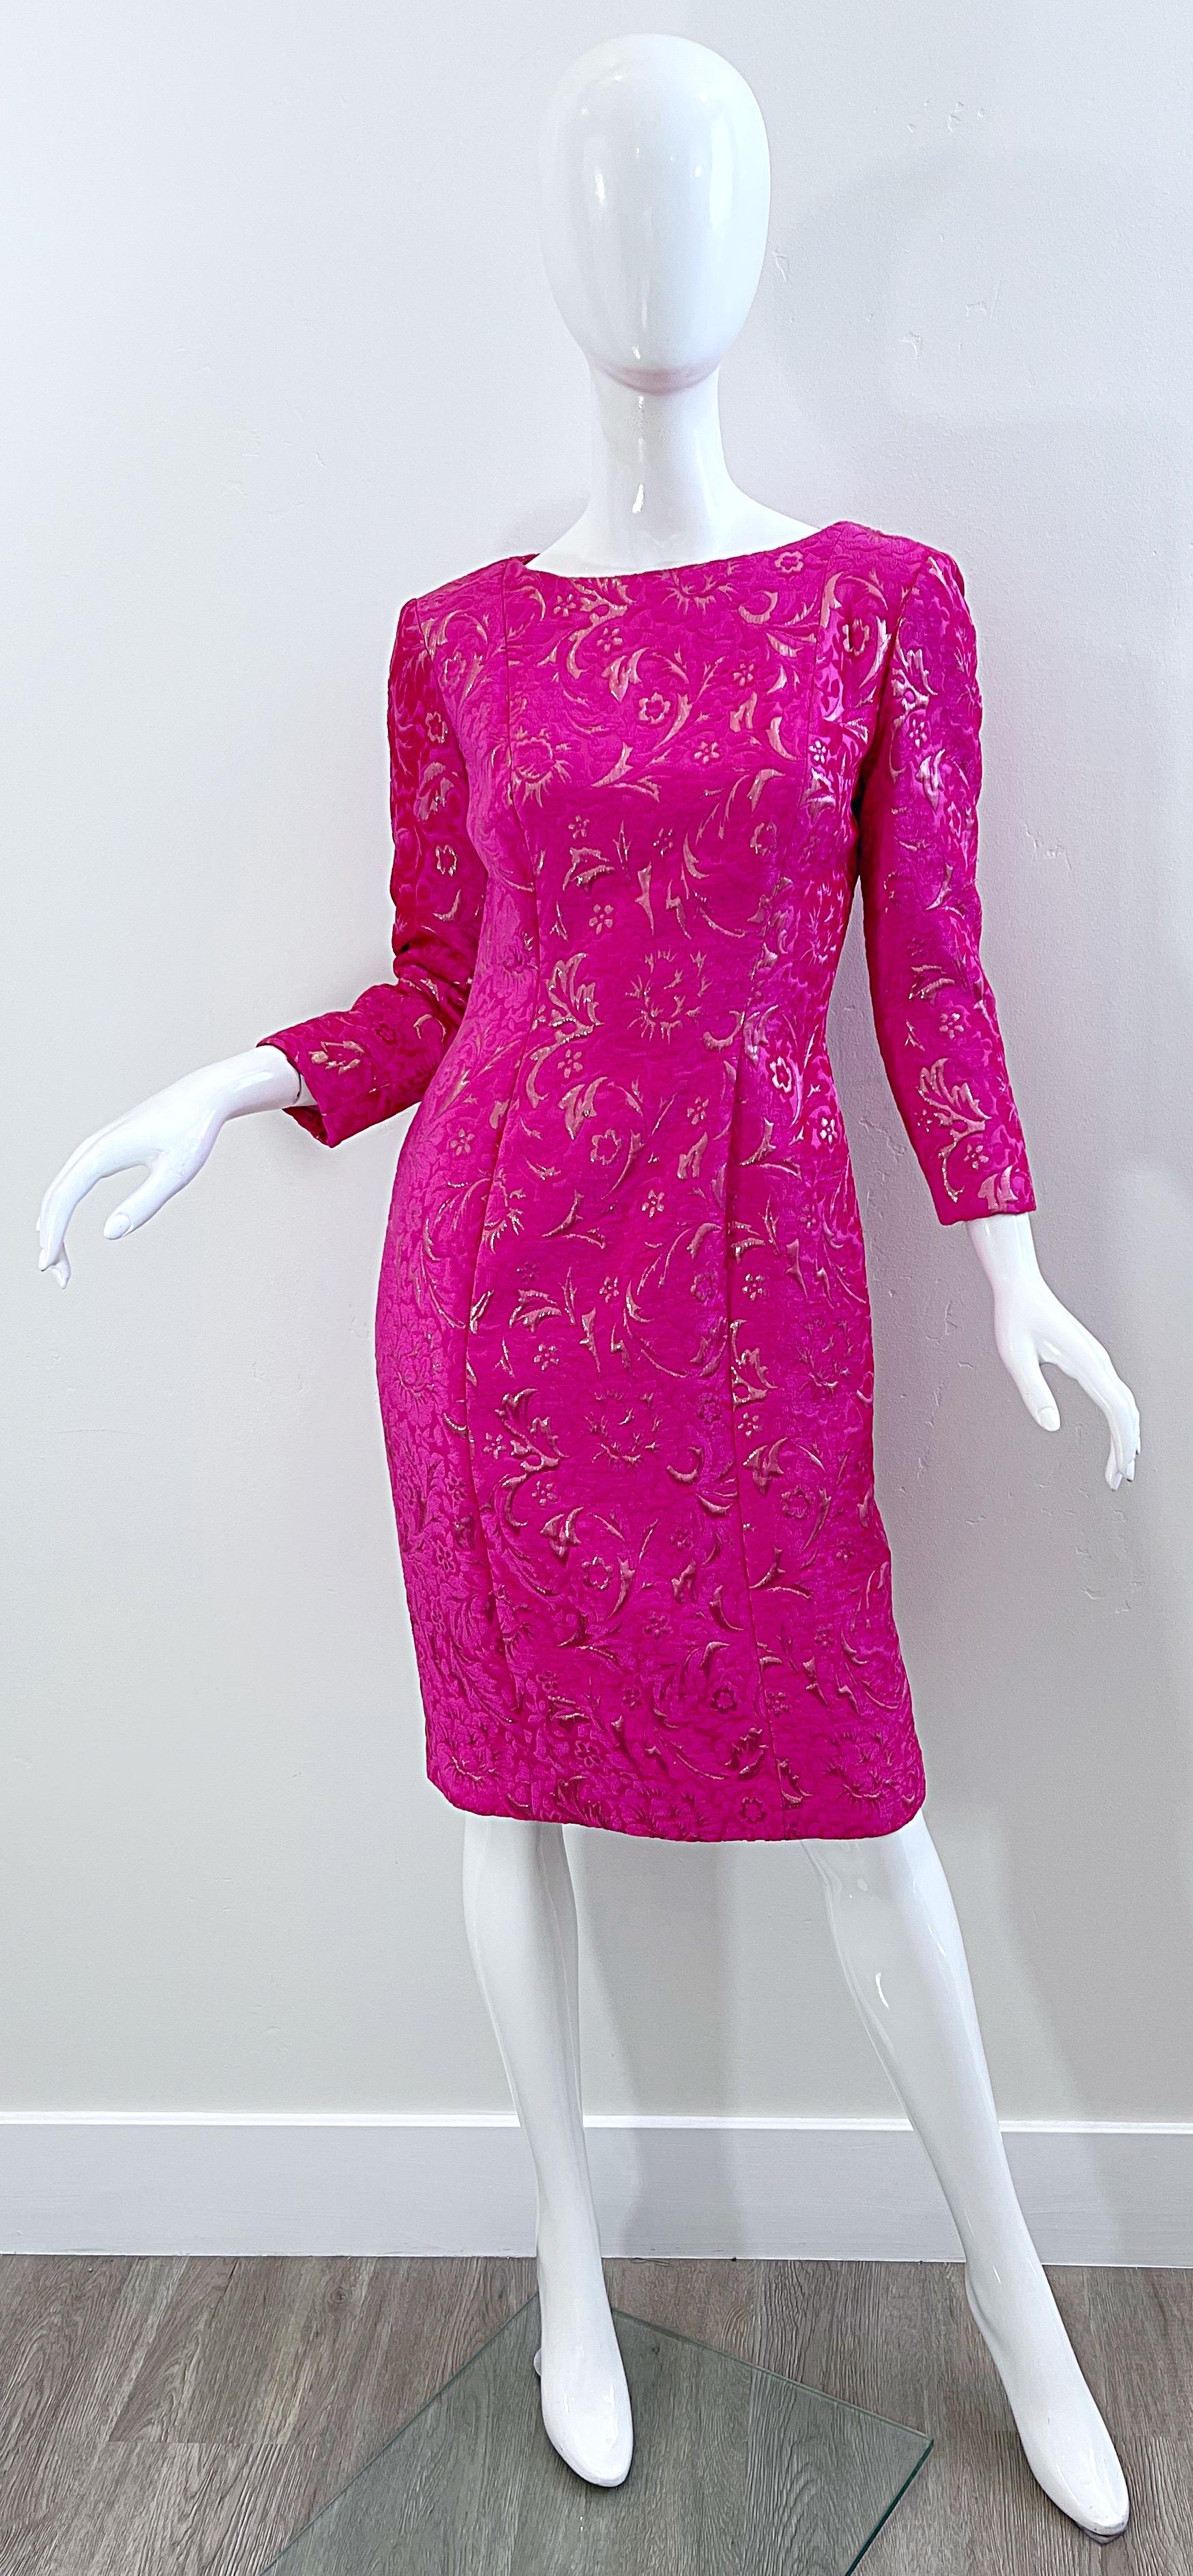 Chic early 2000s OSCAR DE LA RENTA for Saks 5th Avenue hot pink and metallic rose gold chenille, cotton, and silk 3/4 sleeves dress ! Features a super soft fabric with rose gold metallic accents. Hidden zipper up the side back with hook-and-eye